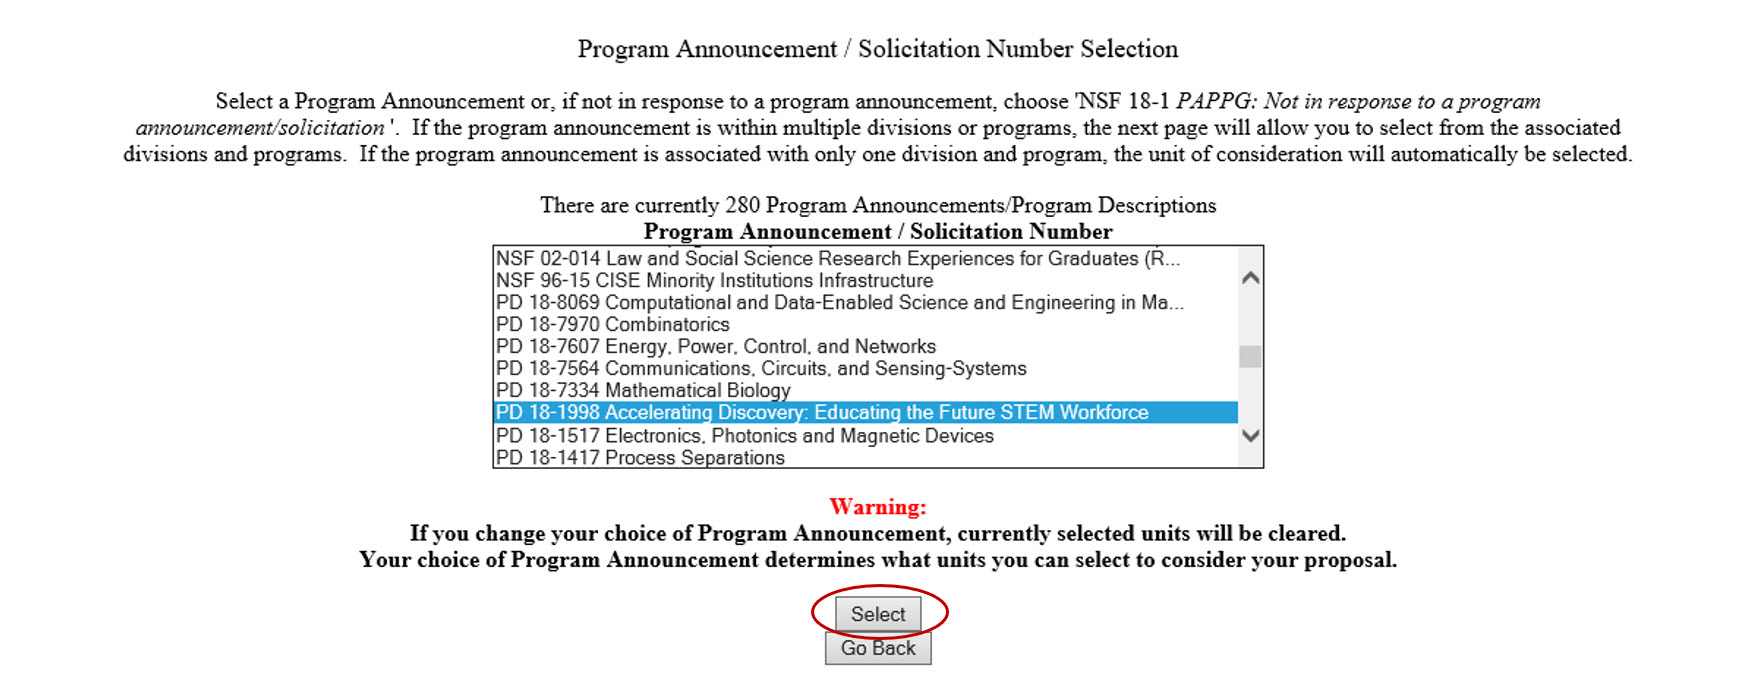 Program Announcement/Solicitation Number Selection - 1.	User selecting Accelerating Discovery from the Program Announcement drop-down menu